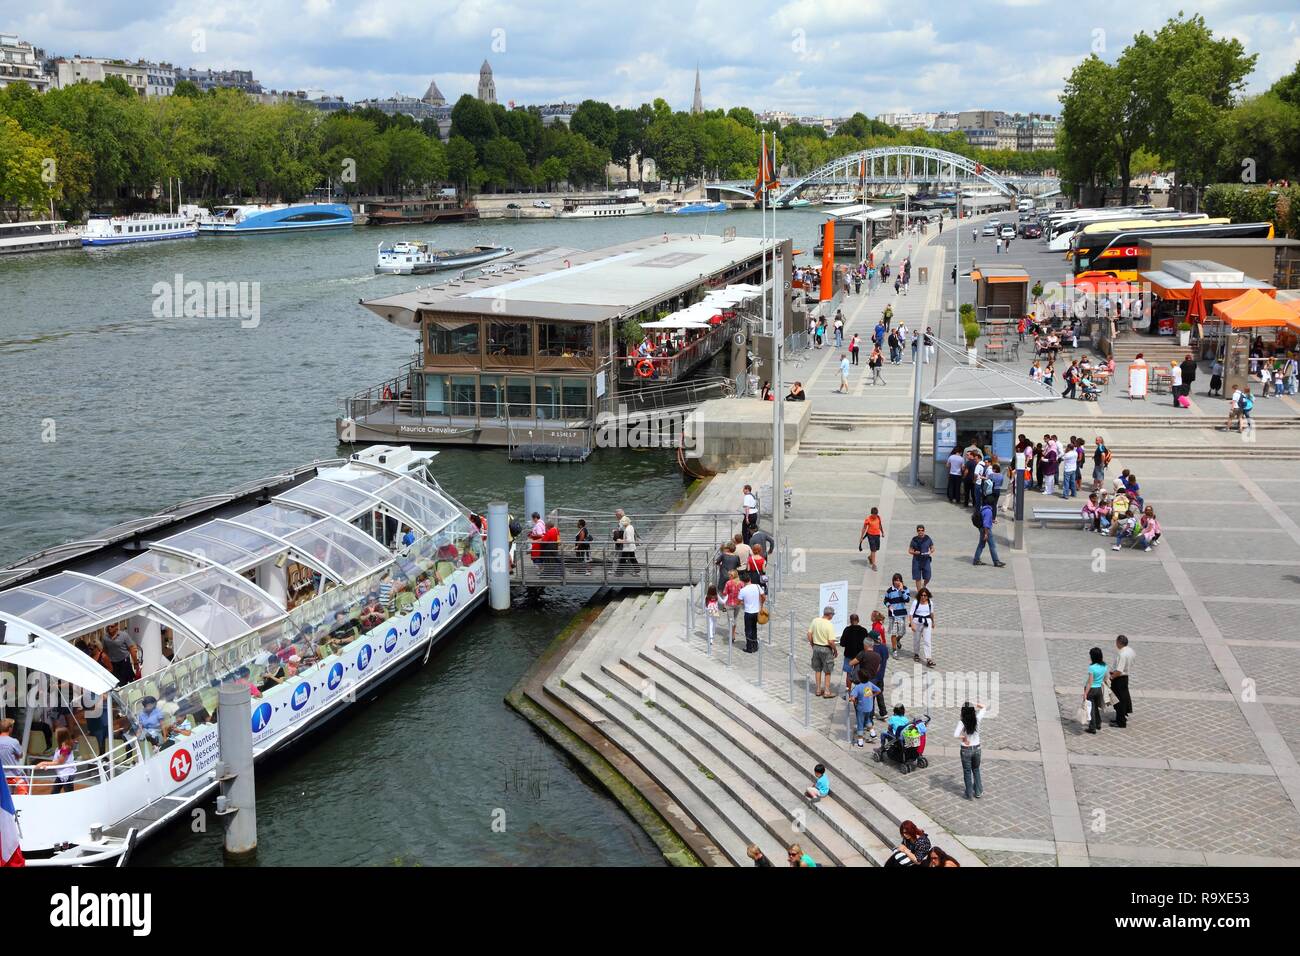 PARIS - JULY 25: Tourists walk along river Seine on July 25, 2011 in Paris, France. Paris is the most visited city in the world with 15.6 million inte Stock Photo